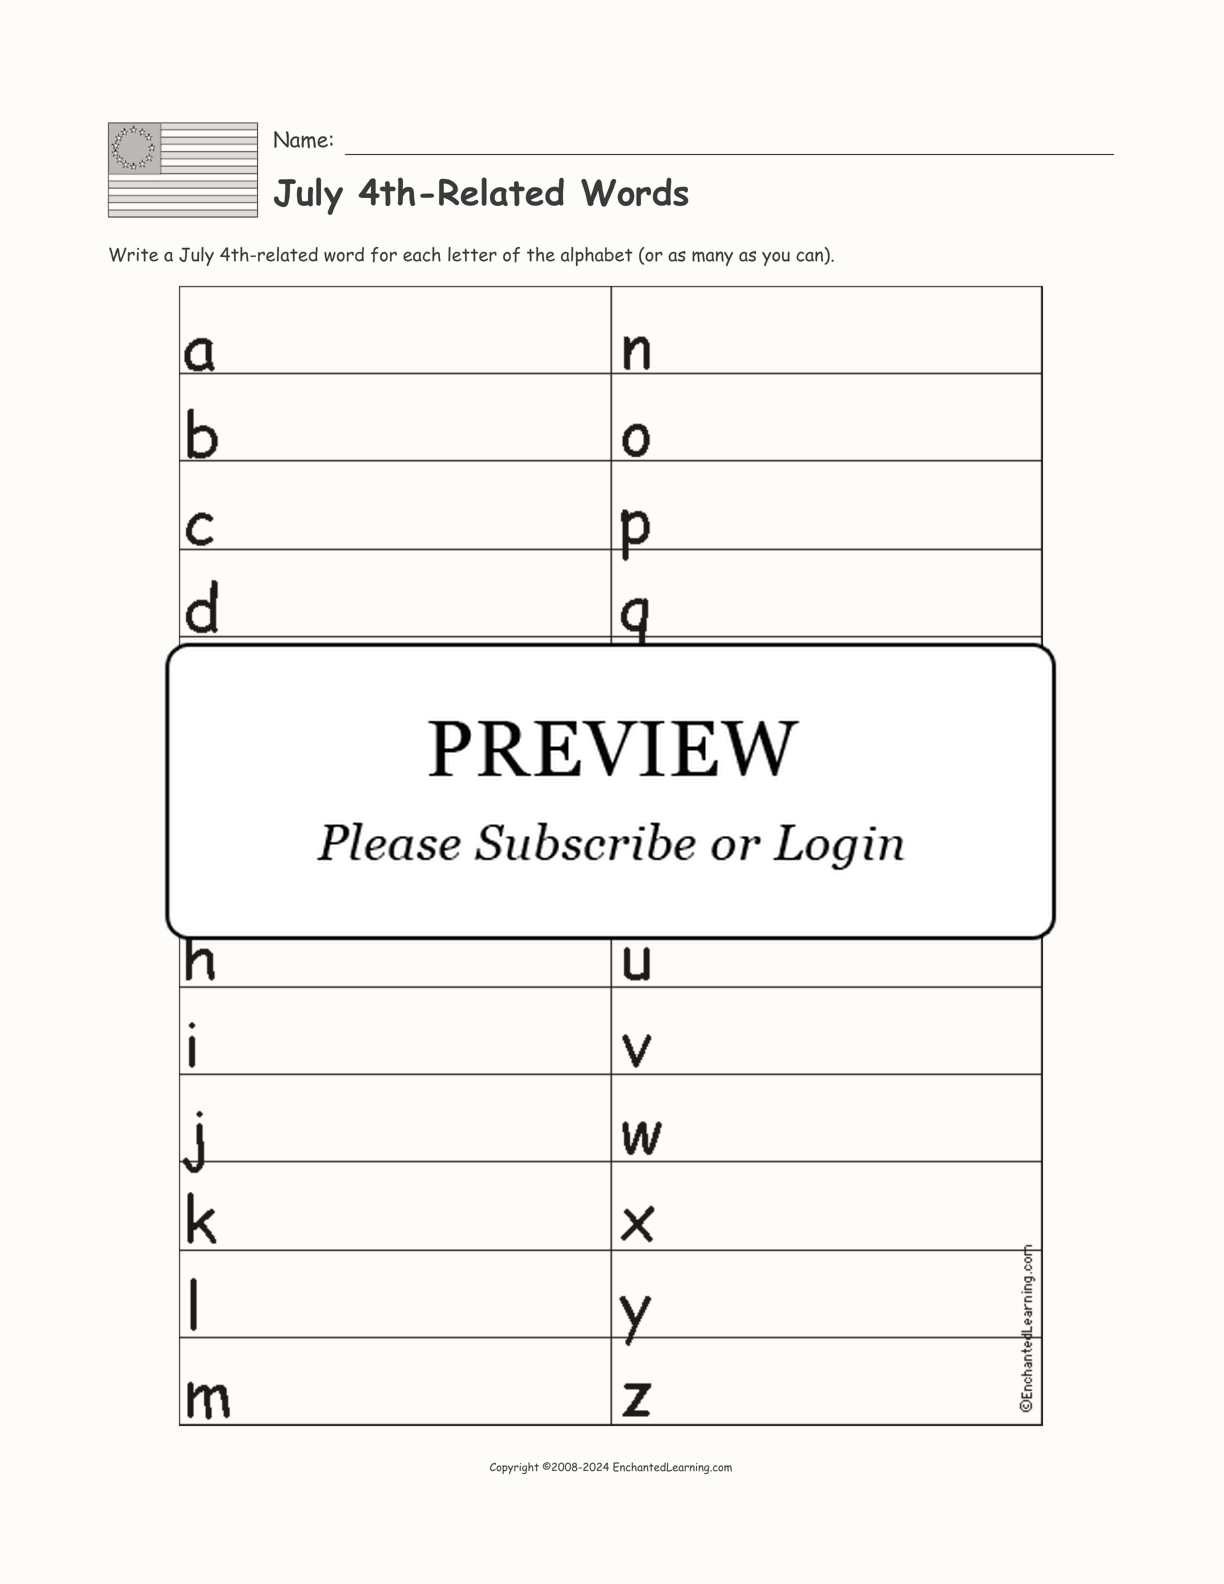 July 4th-Related Words interactive worksheet page 1